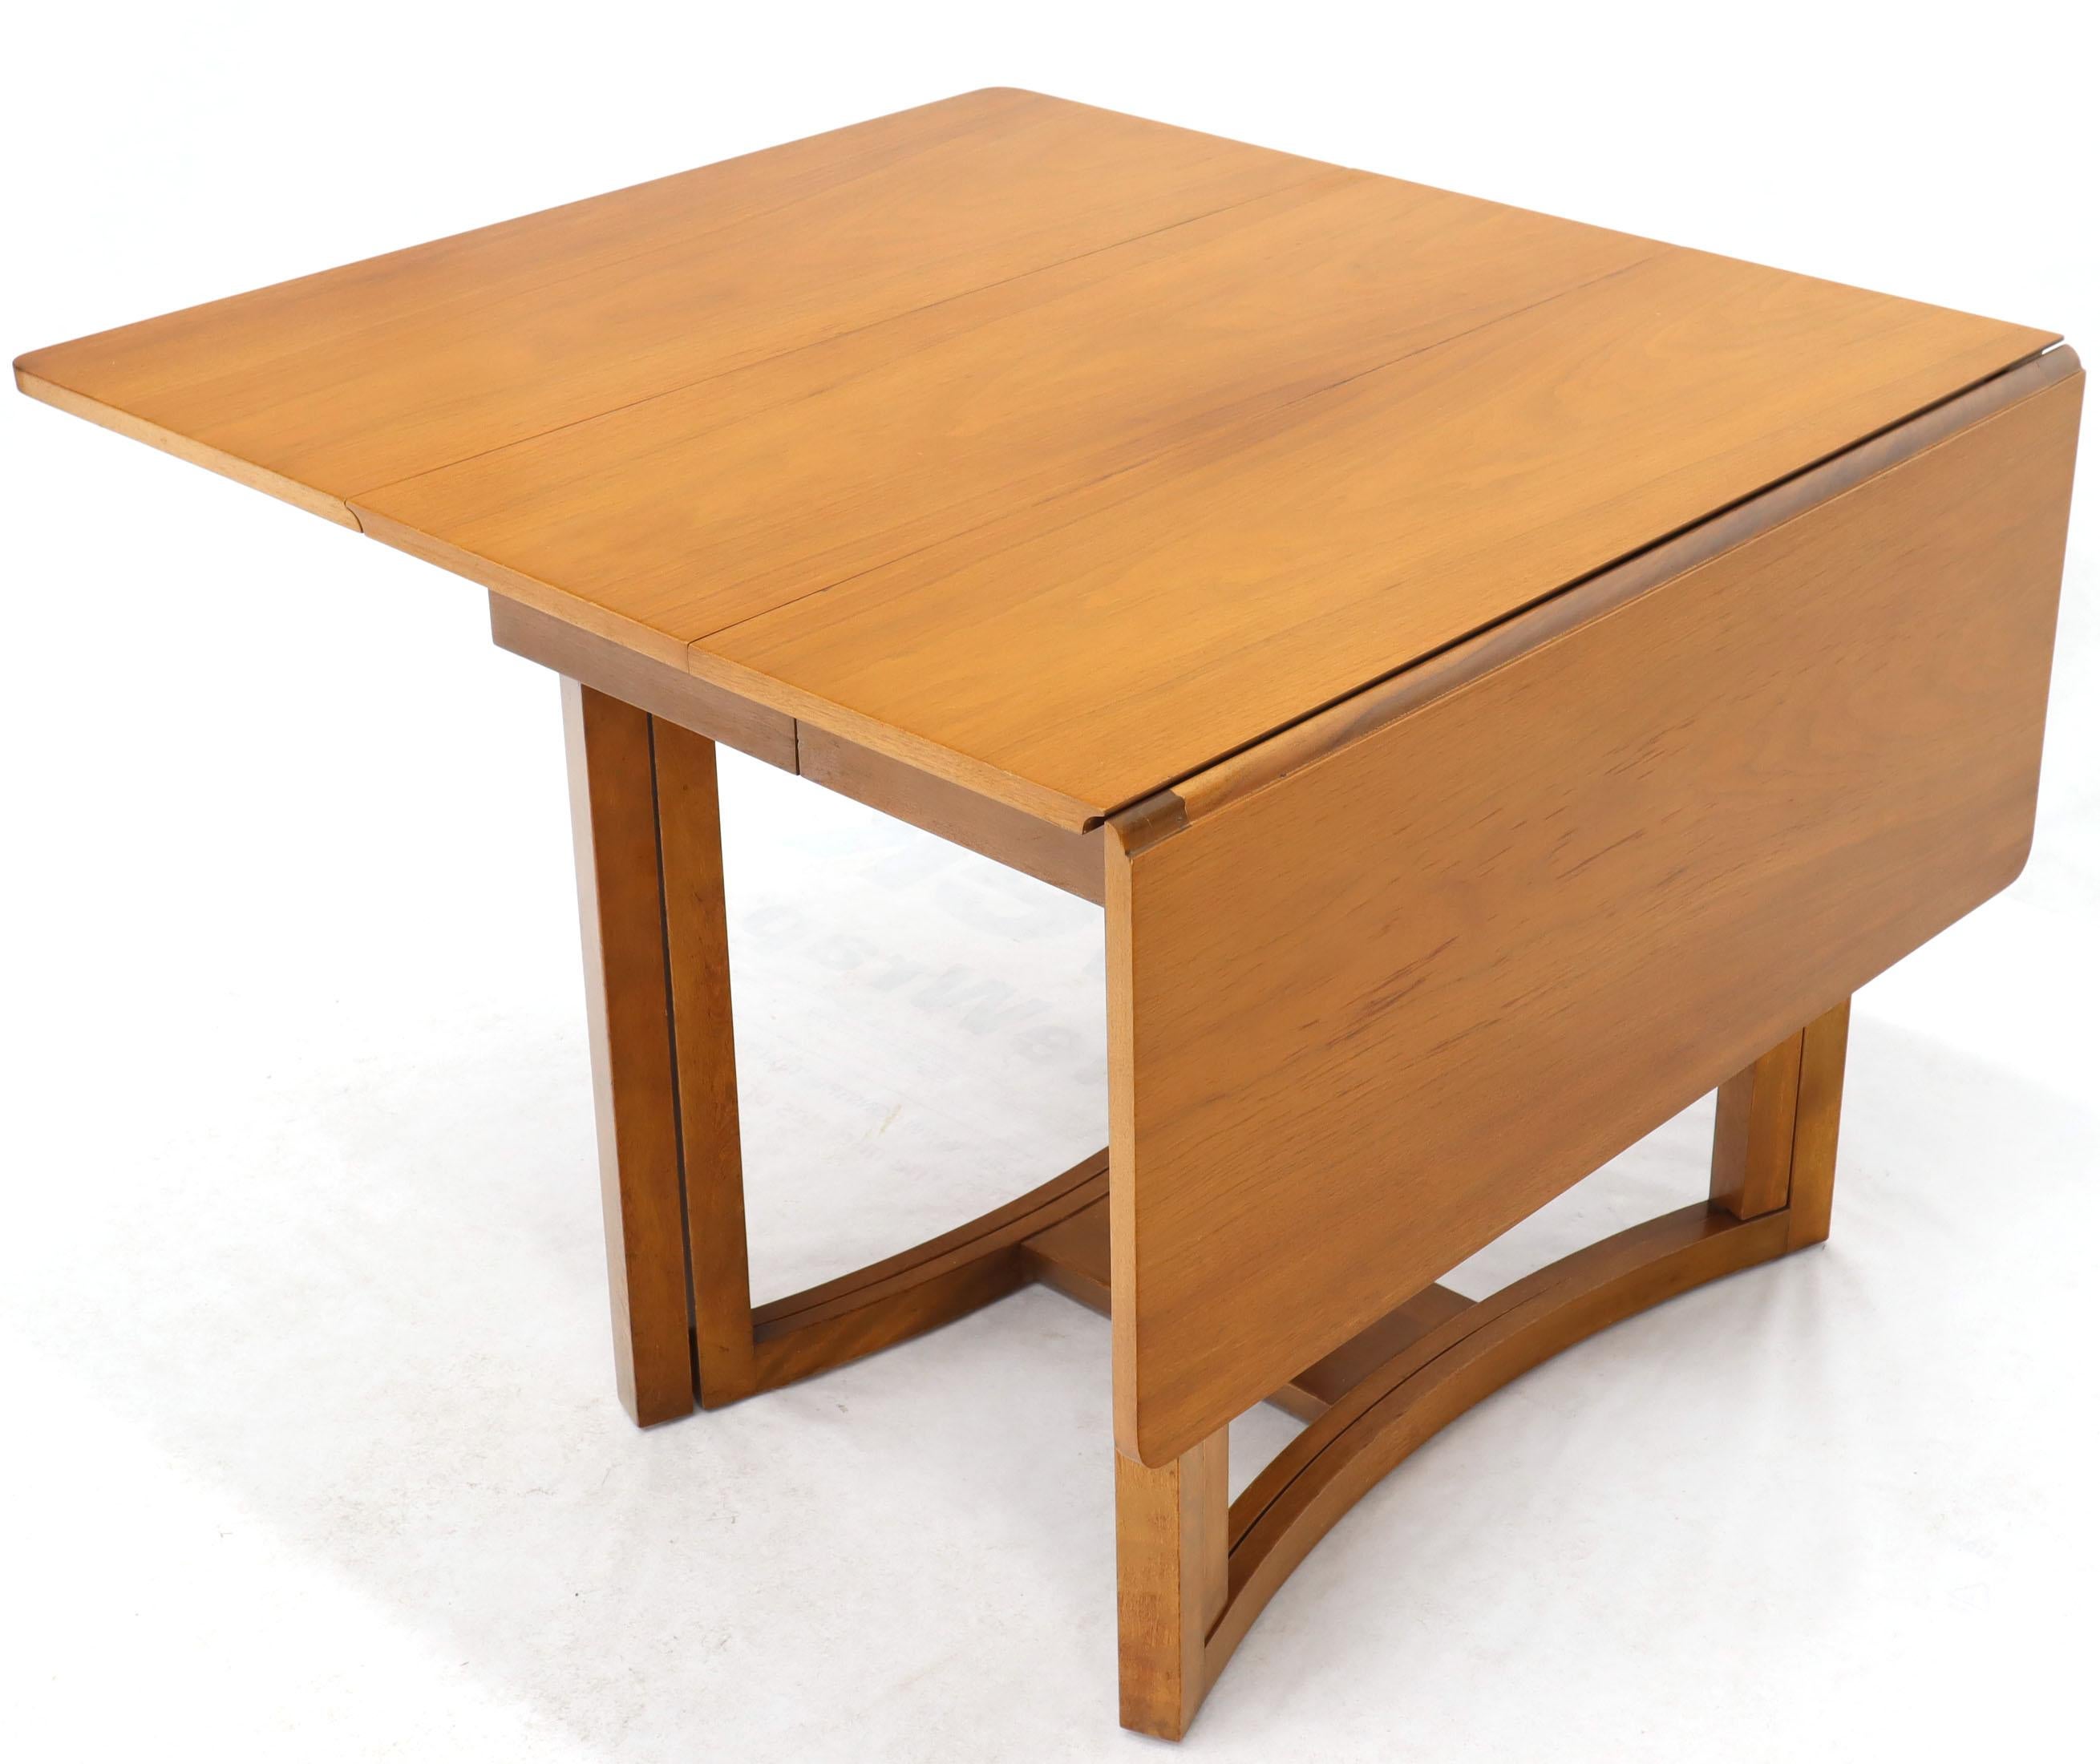 Midcentury Light Walnut Drop Leaf Expandable Dining Table, Three Leafs Boards In Good Condition For Sale In Rockaway, NJ